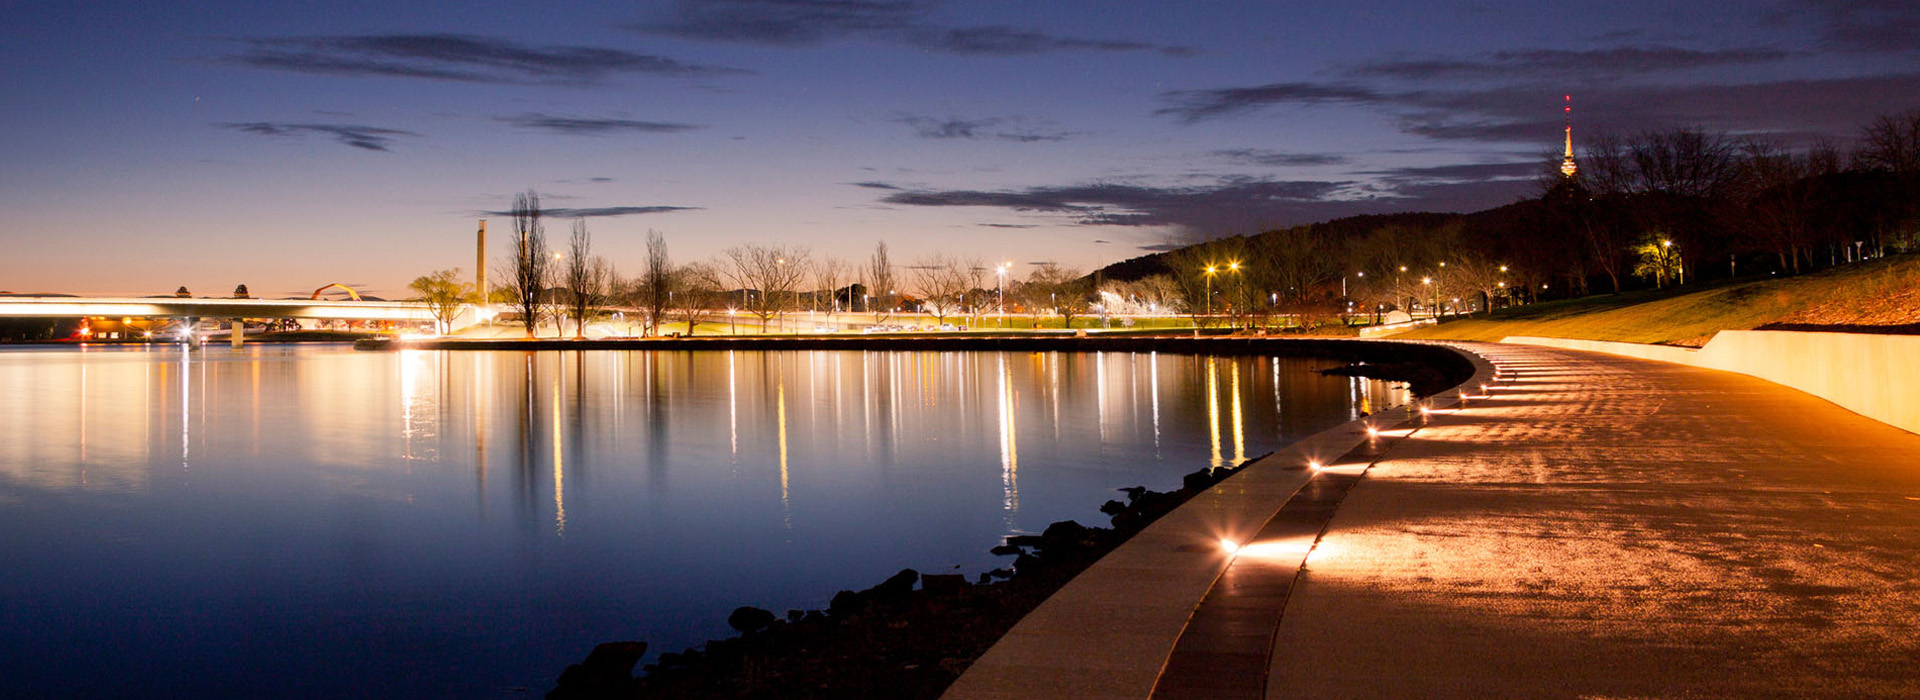 Canberra at night